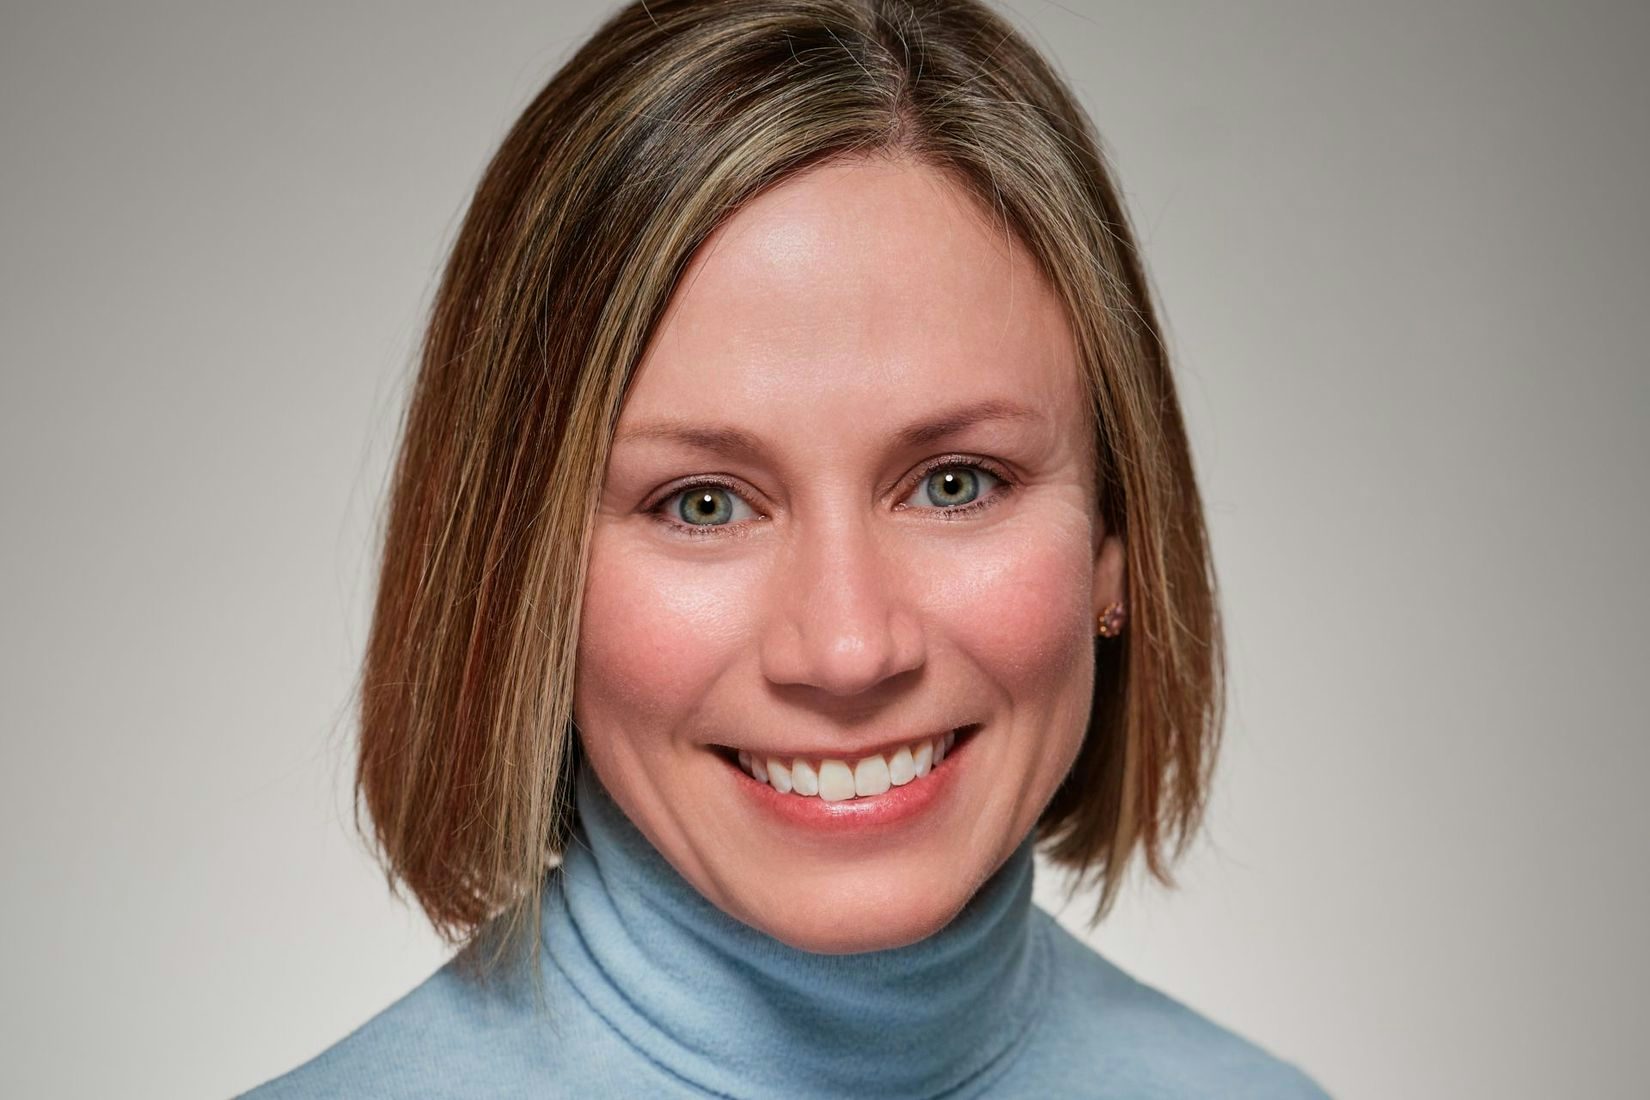 A light skinned woman with chin length dark blonde hair smiles wearing a light blue turtle neck sweater. 